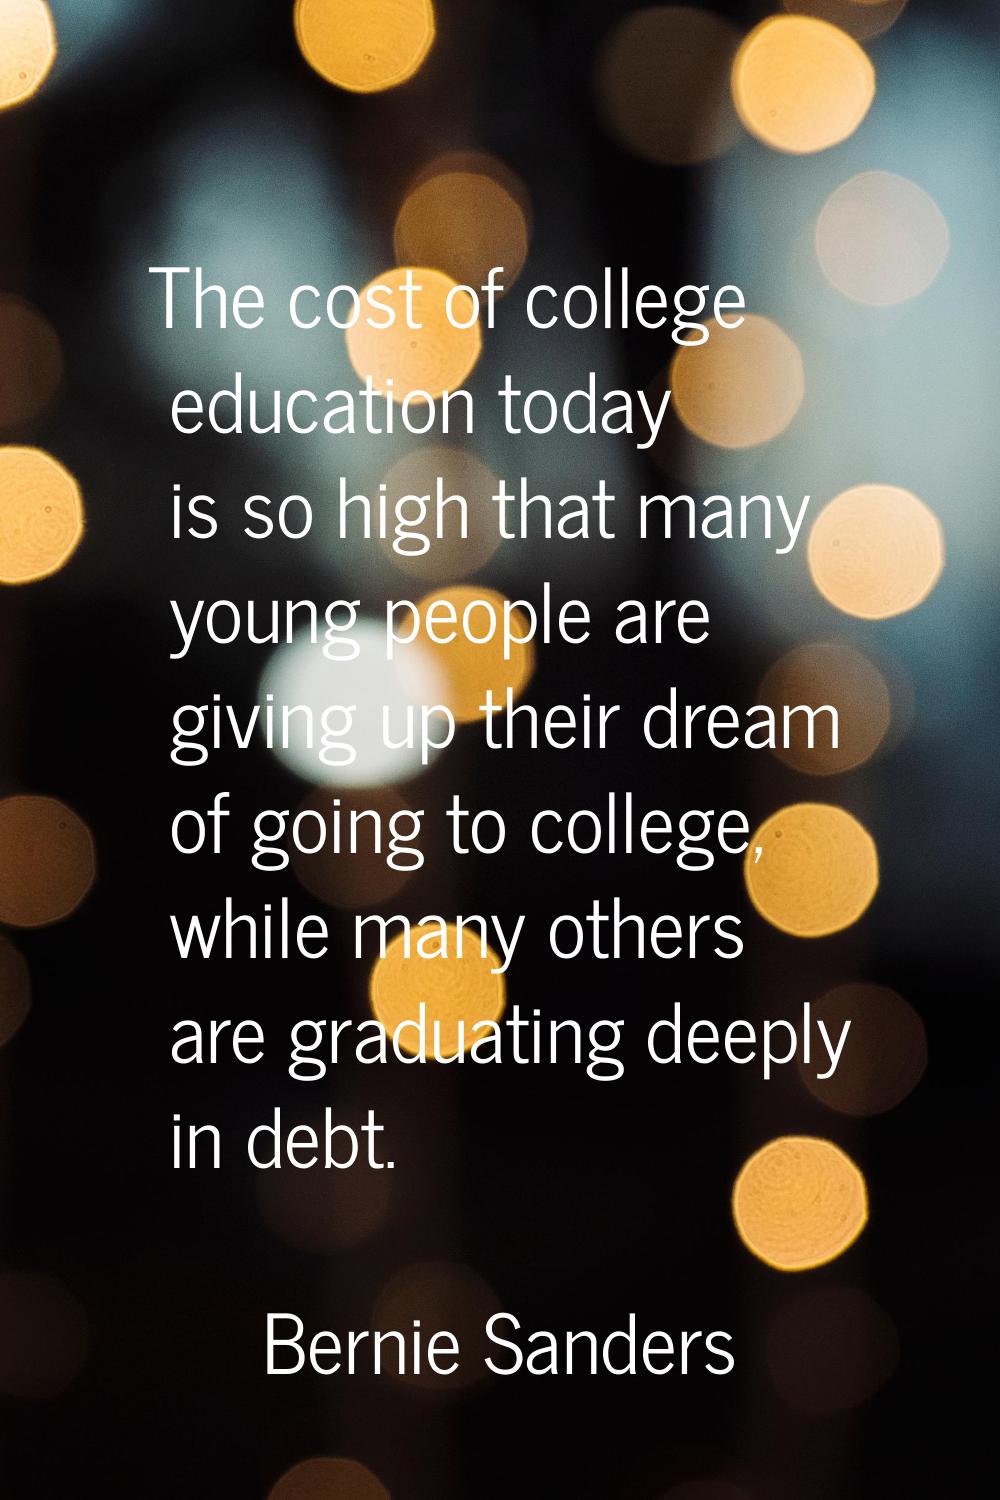 The cost of college education today is so high that many young people are giving up their dream of 